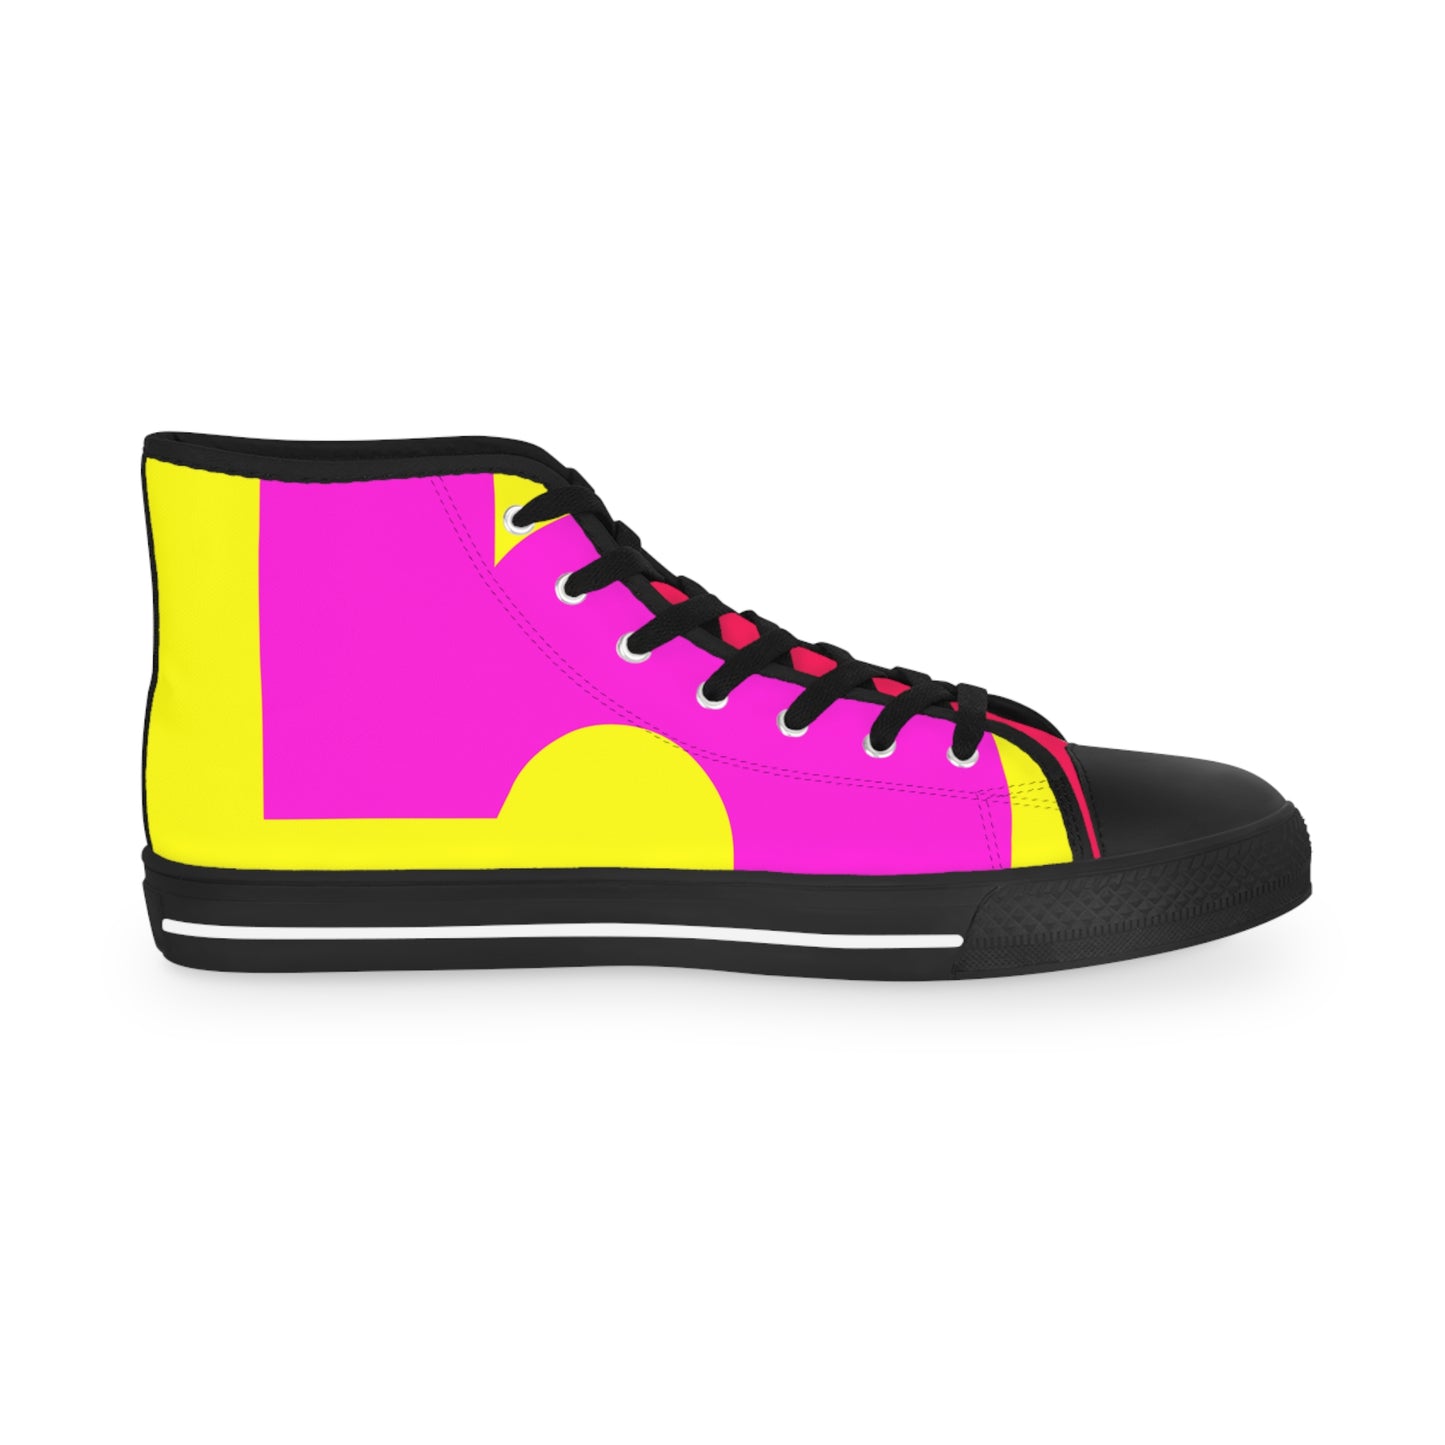 Limited Edition High Top Sneakers - 5